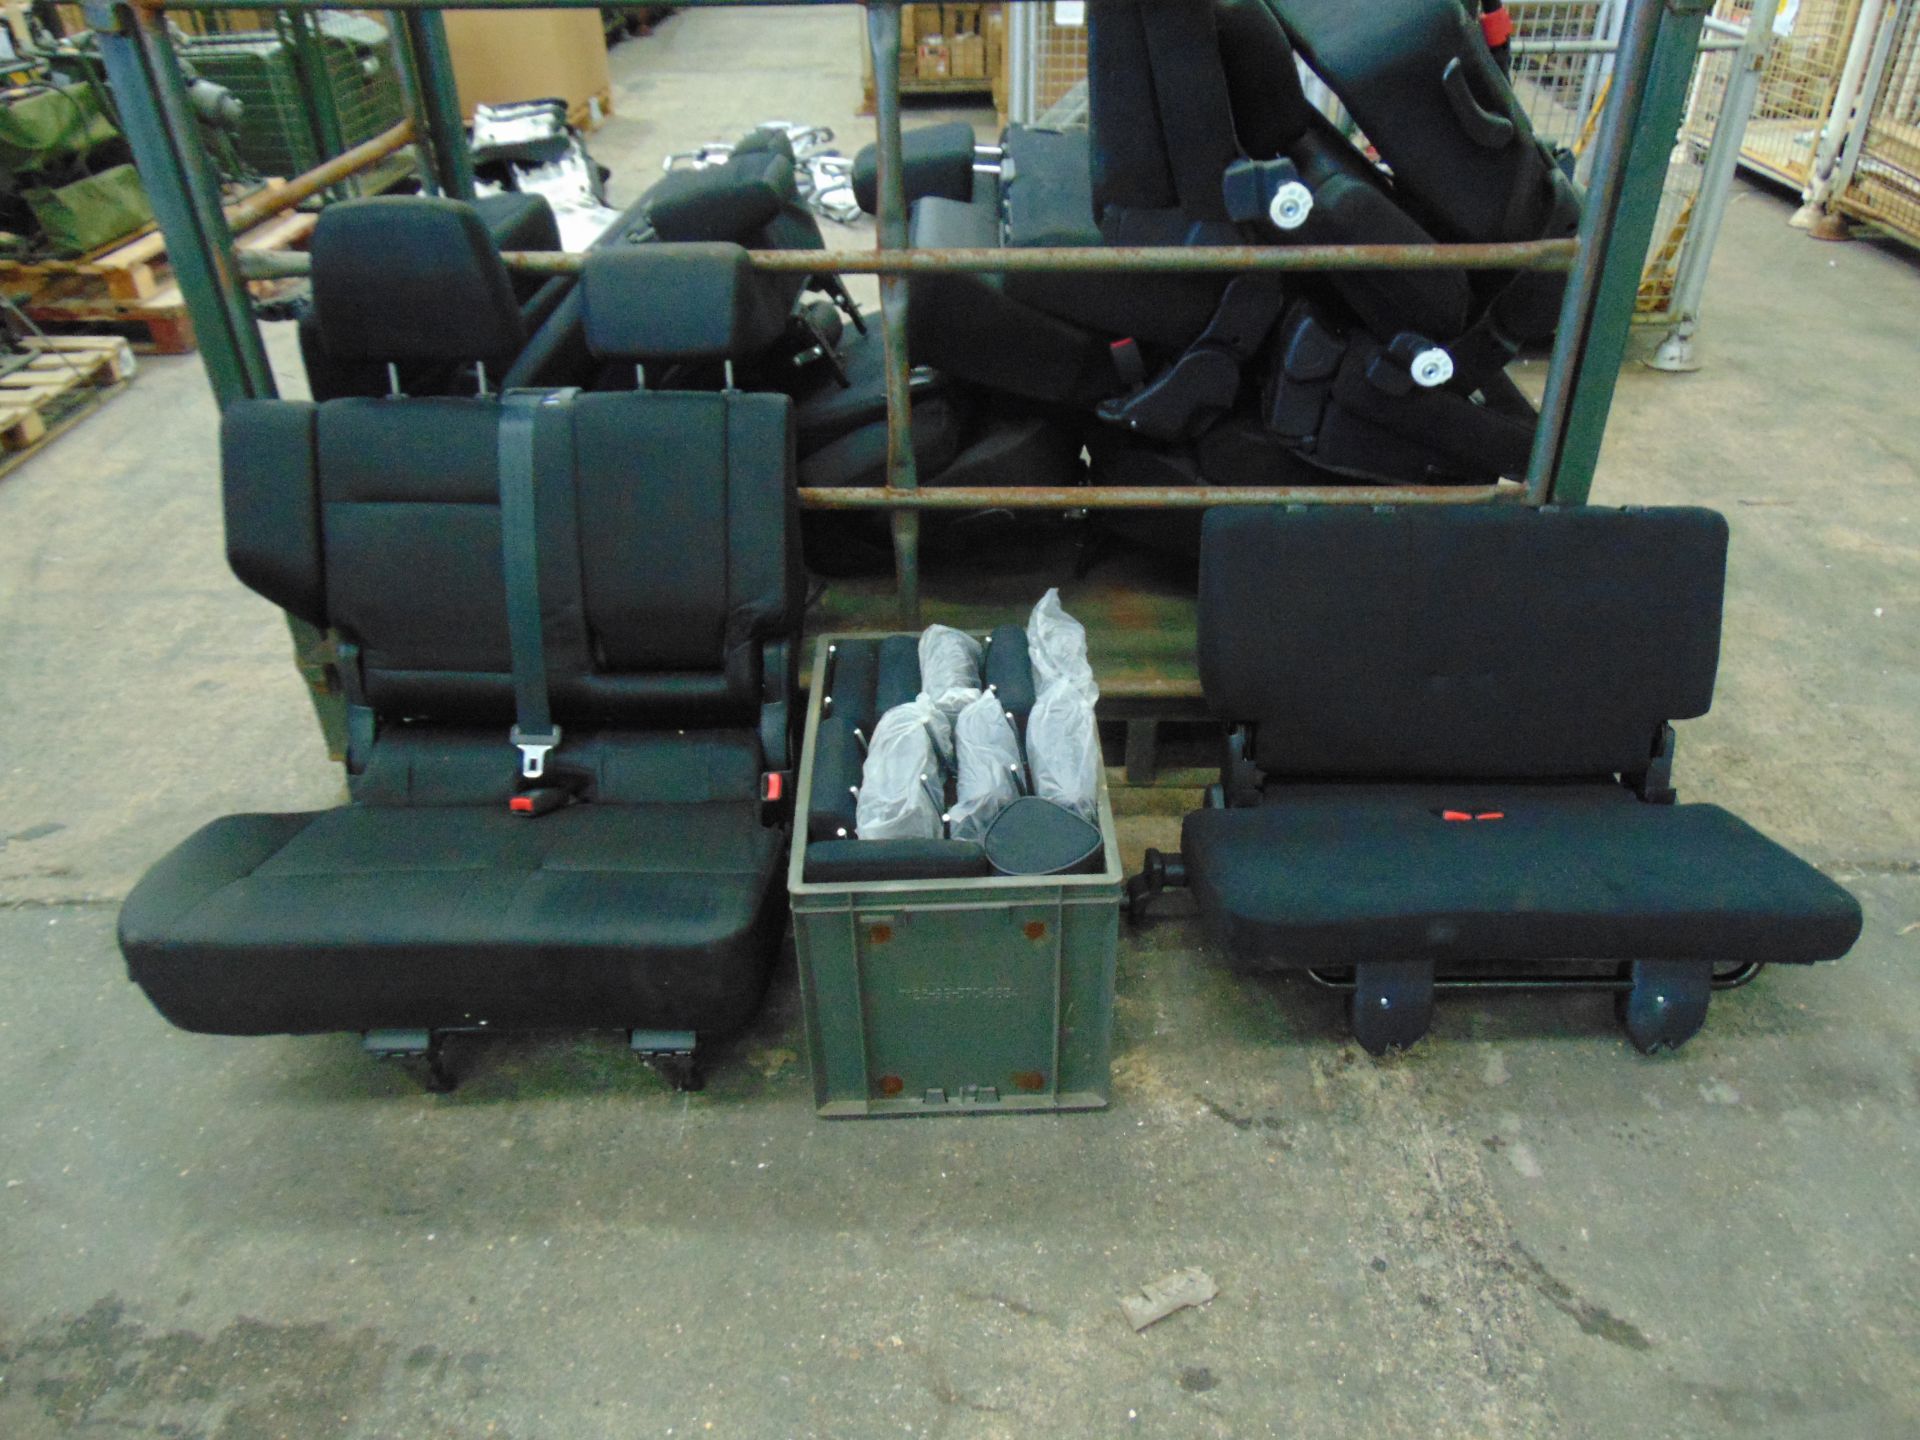 Mixed Stillage of Mitsubishi Bench Seats and Head Rests